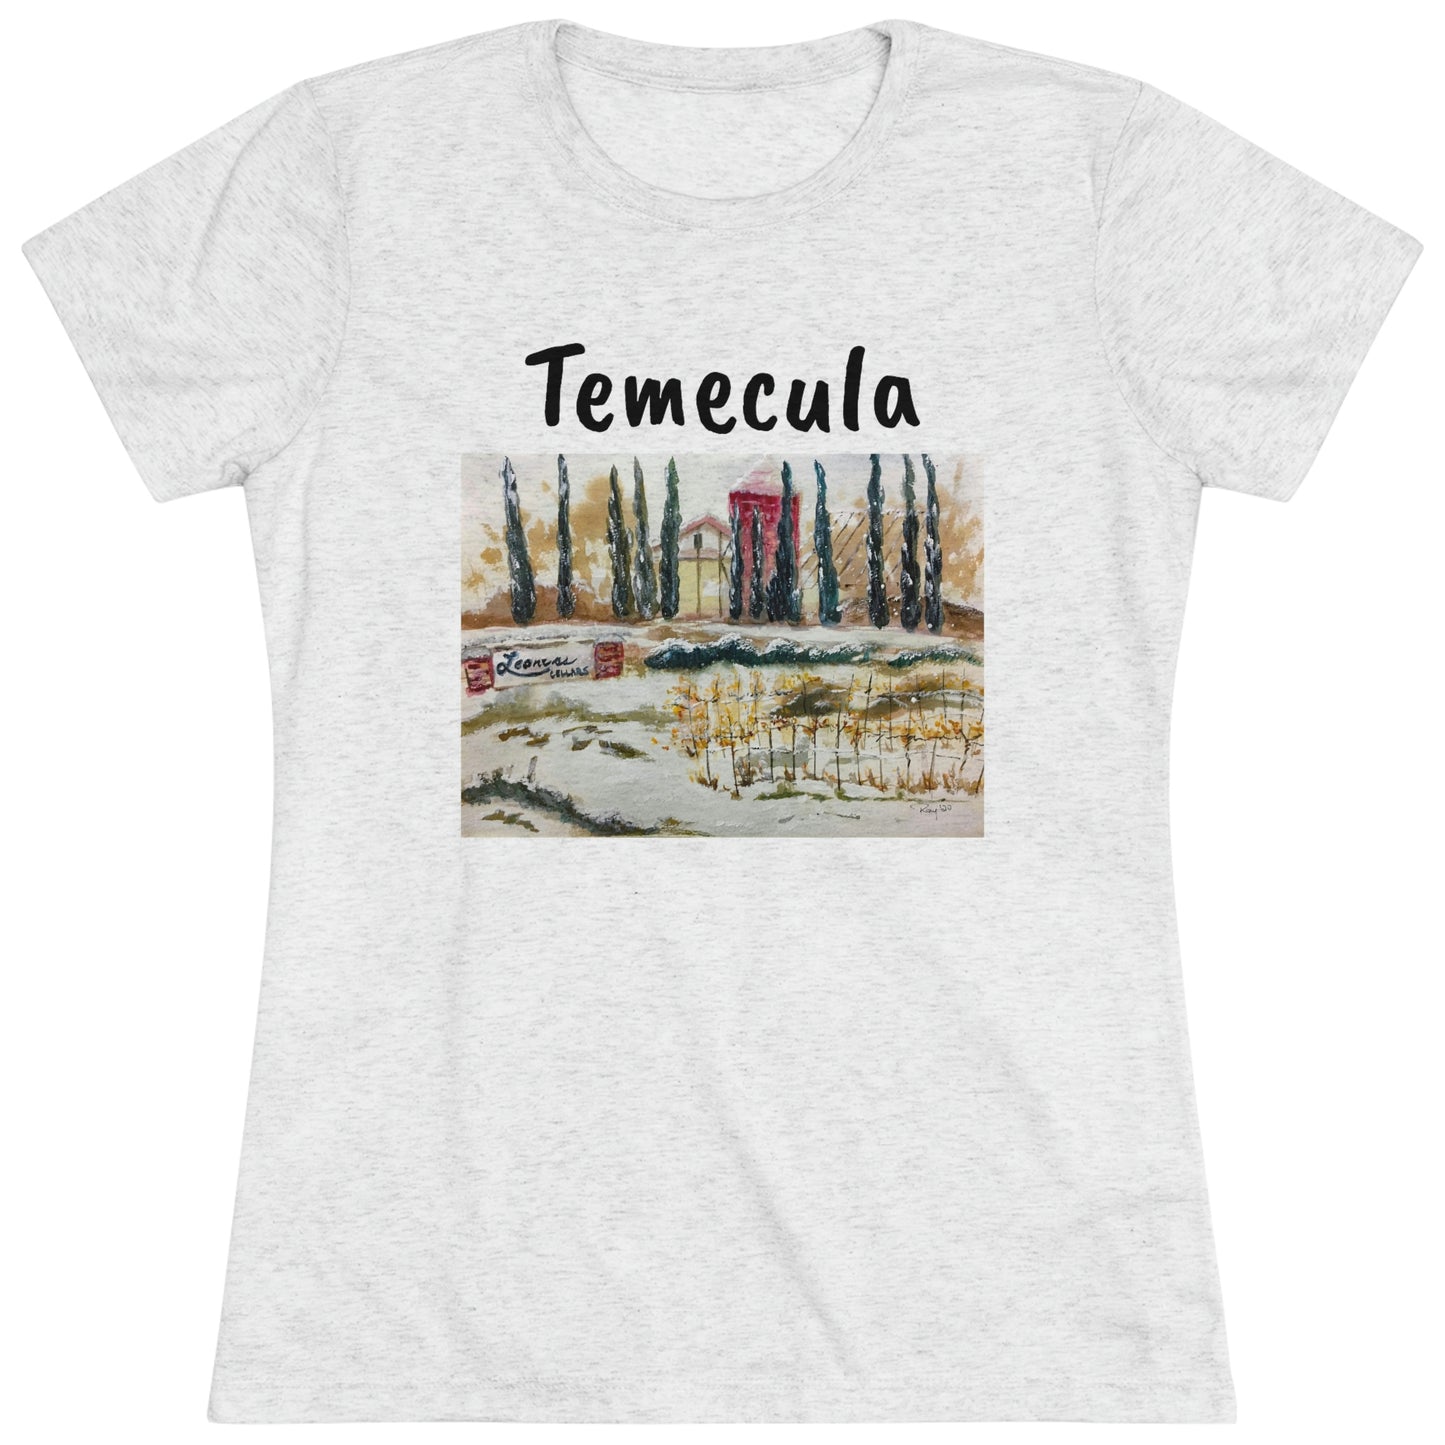 Leoness Cellars (that day it snowed) Temecula Women's fitted Triblend Tee  tee shirt